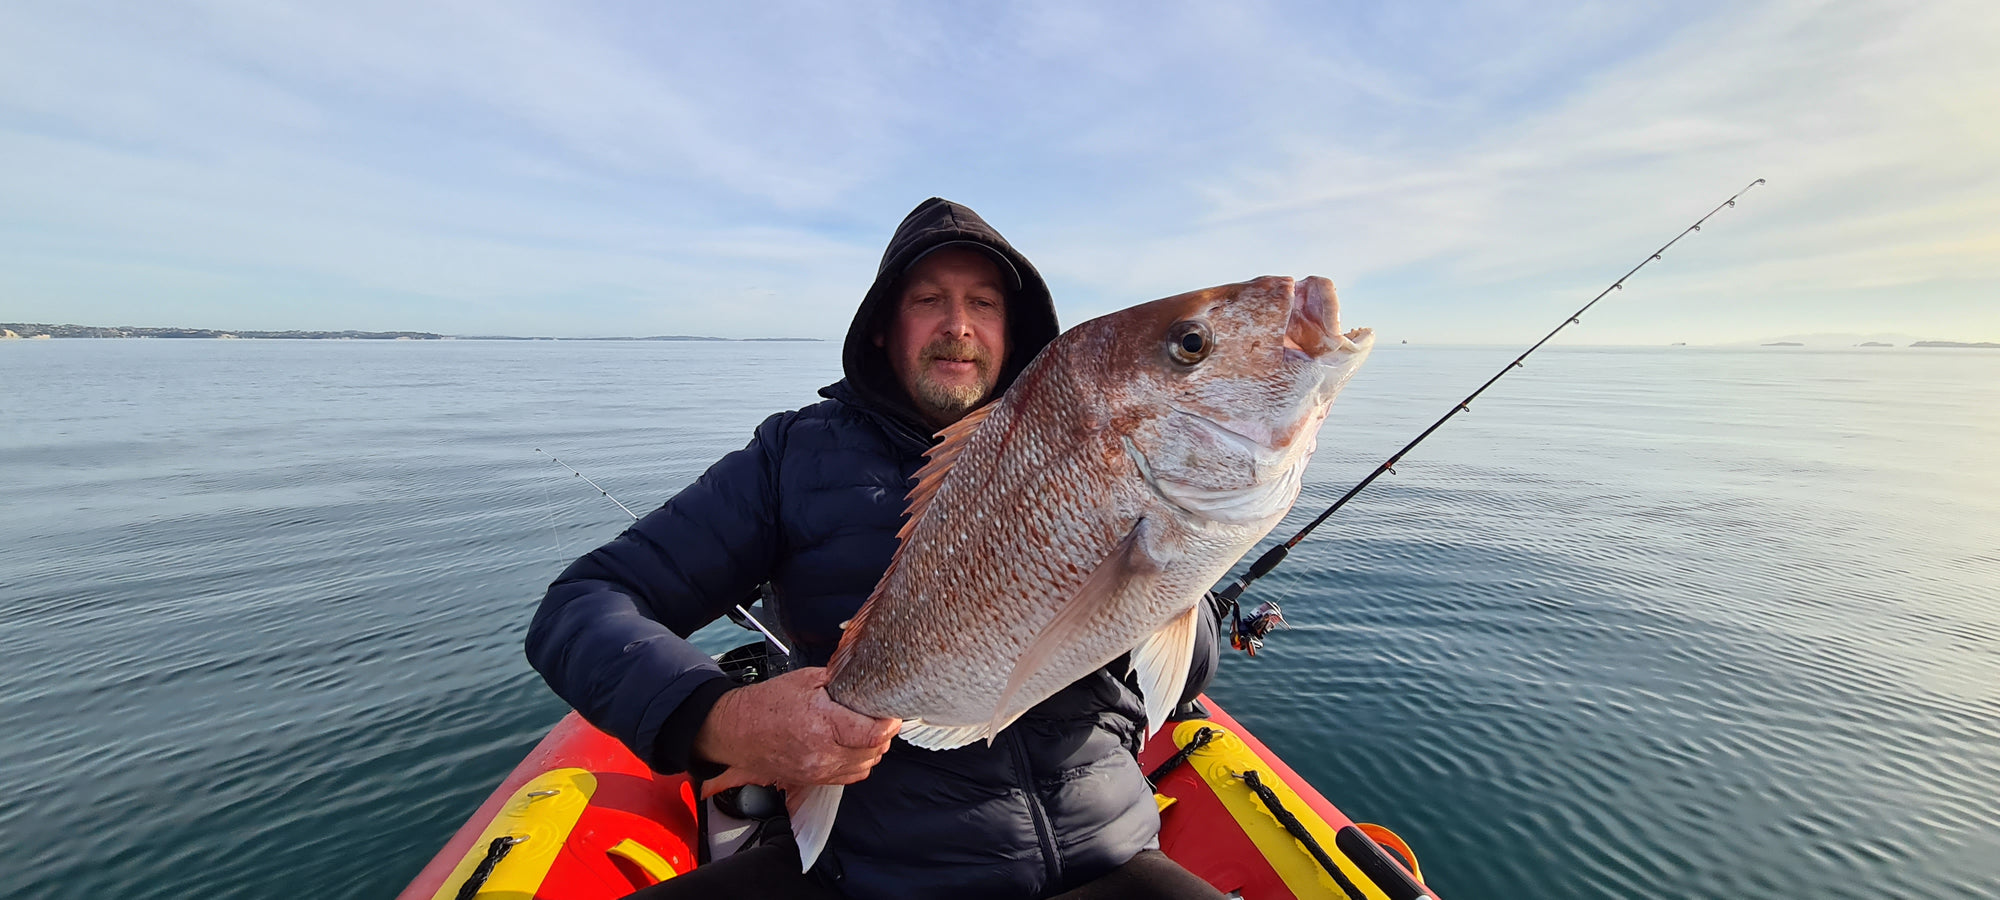 Another successful fishing trip in a True Kit inflatable